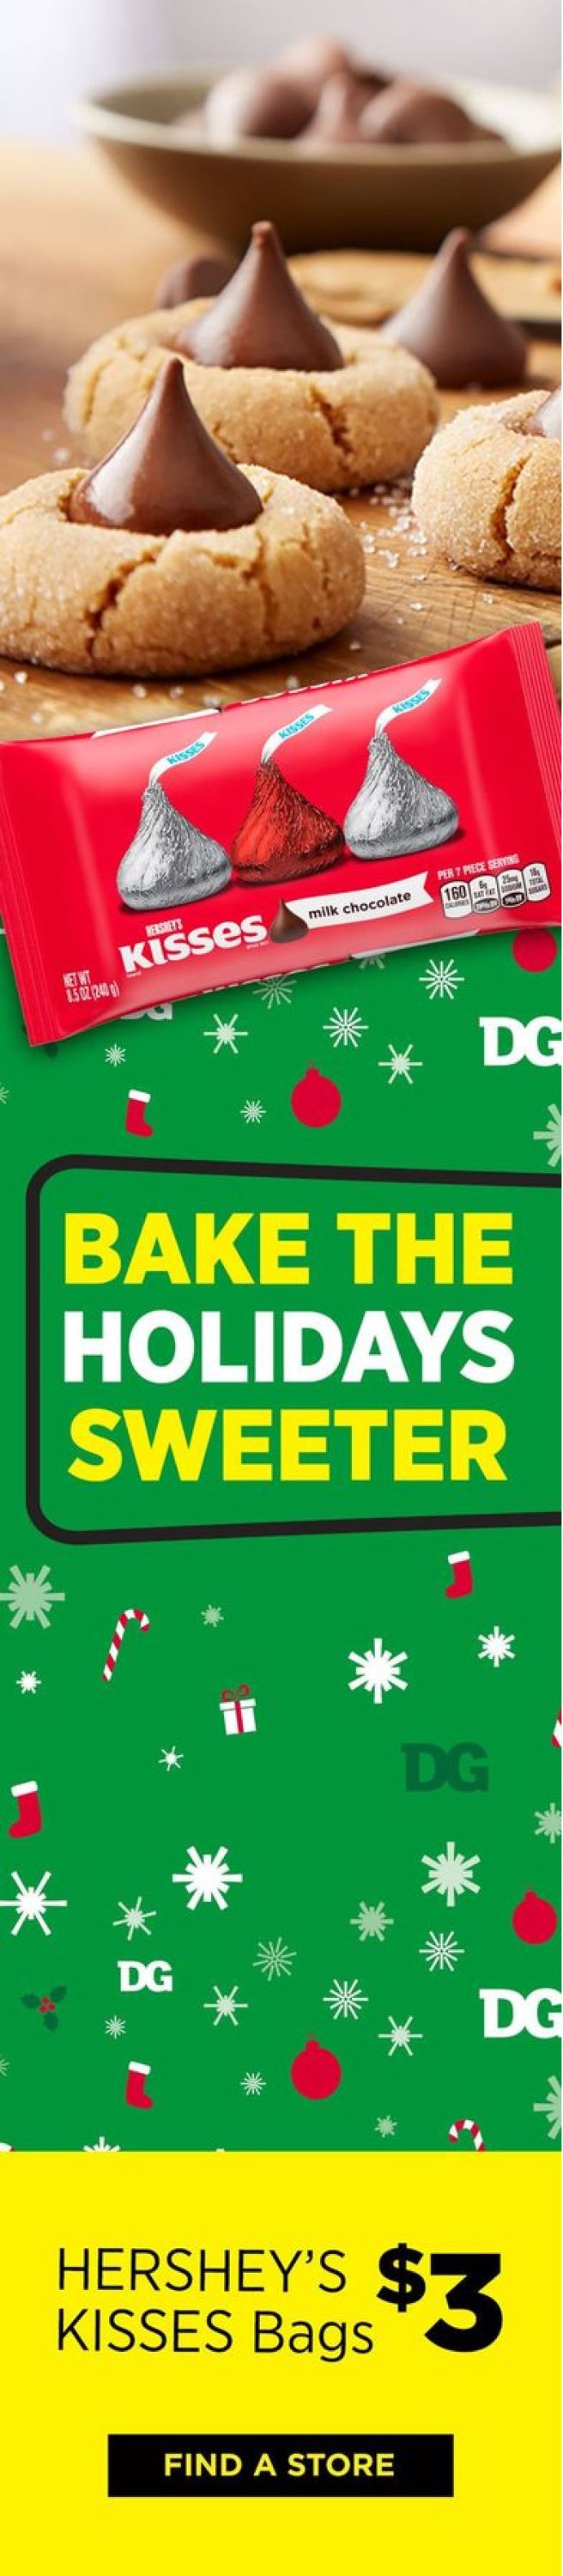 Dollar General - Christmas Ad 2019 Current weekly ad 11/24 - 11/30/2019 ...